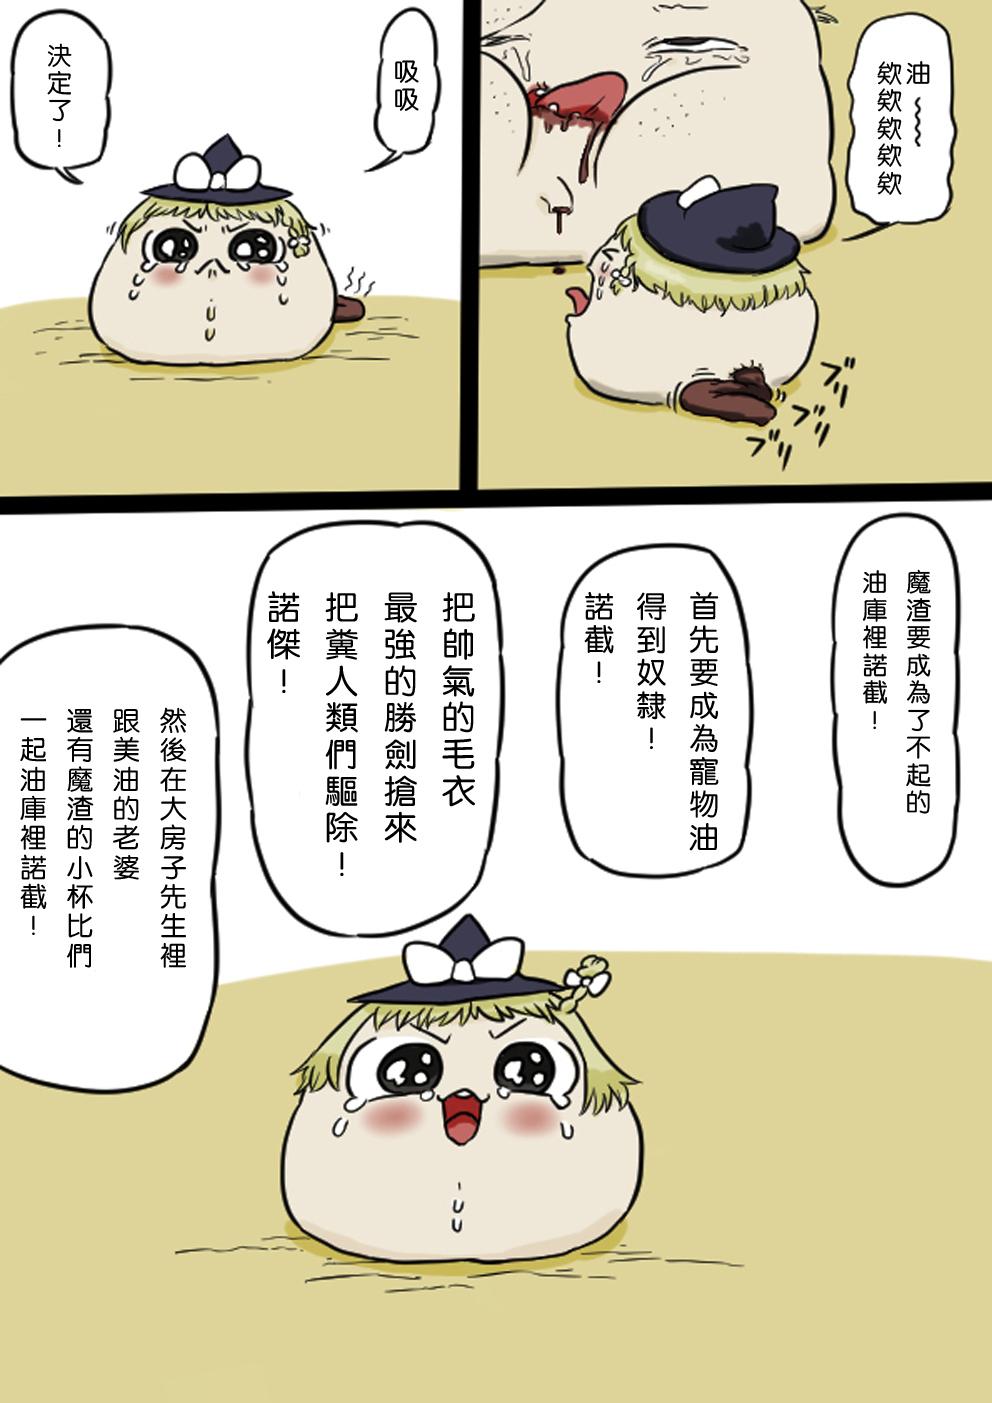 Moan すべてをてにいれたまりちゃ（Chinese） - Touhou project Casal - Page 2